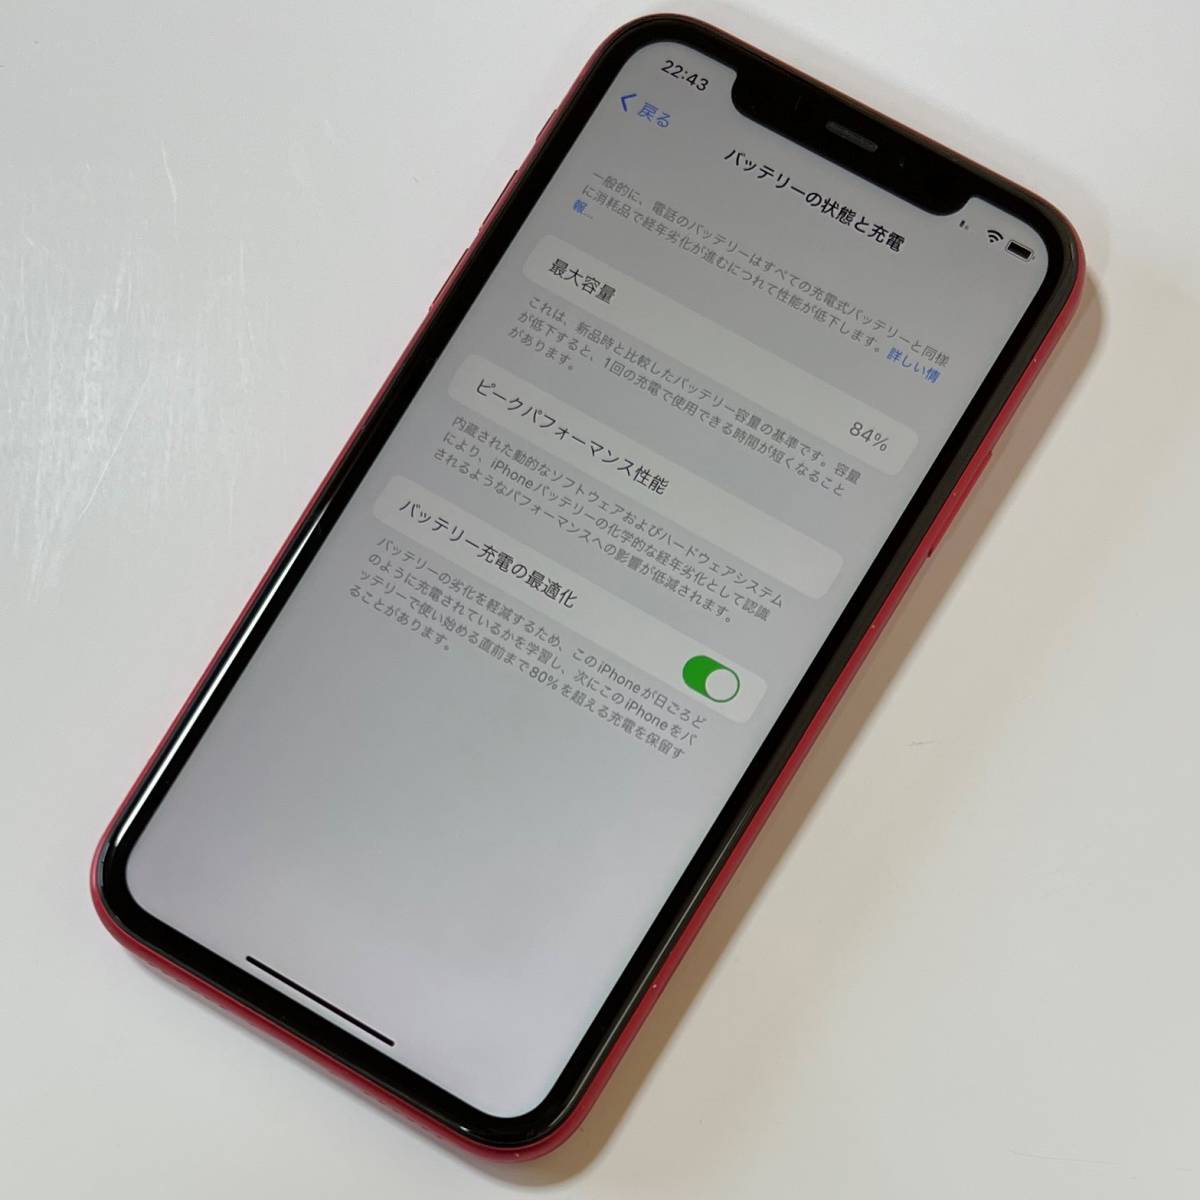 SIMフリー iPhone 11 (PRODUCT)RED Special Edition 64GB MWLV2J/A バッテリー最大容量84％ アクティベーションロック解除済の画像4